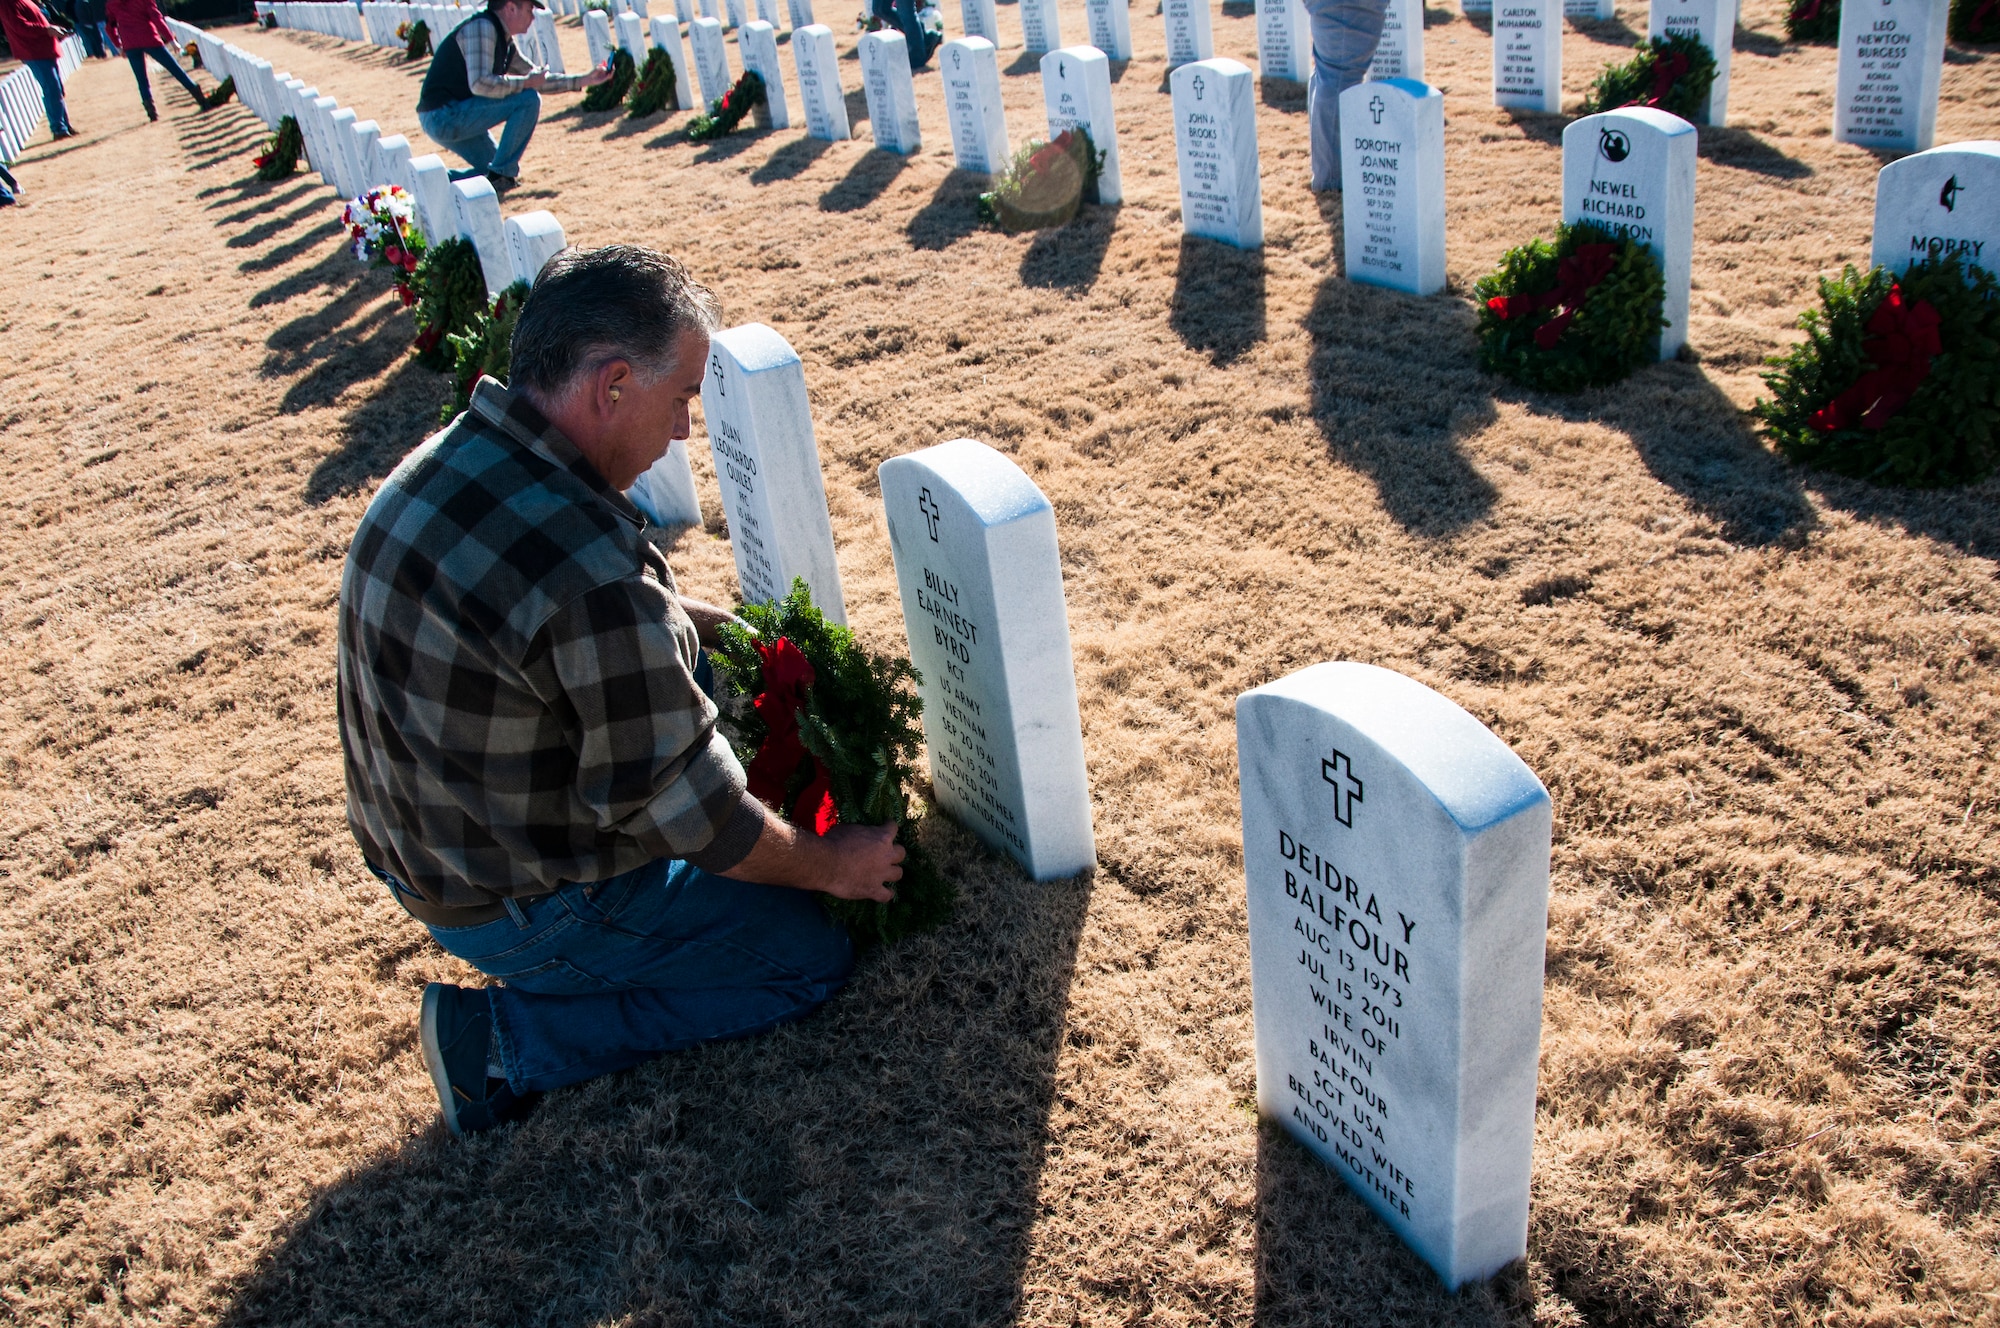 A volunteer lays a wreath on a gravestone for Wreaths Across America at Georgia National Cemetery in Canton, Ga. Dec. 13, 2014. Wreaths Across America occurs the second Saturday of December every year. (U.S. Air Force photo/Senior Airman Daniel Phelps)